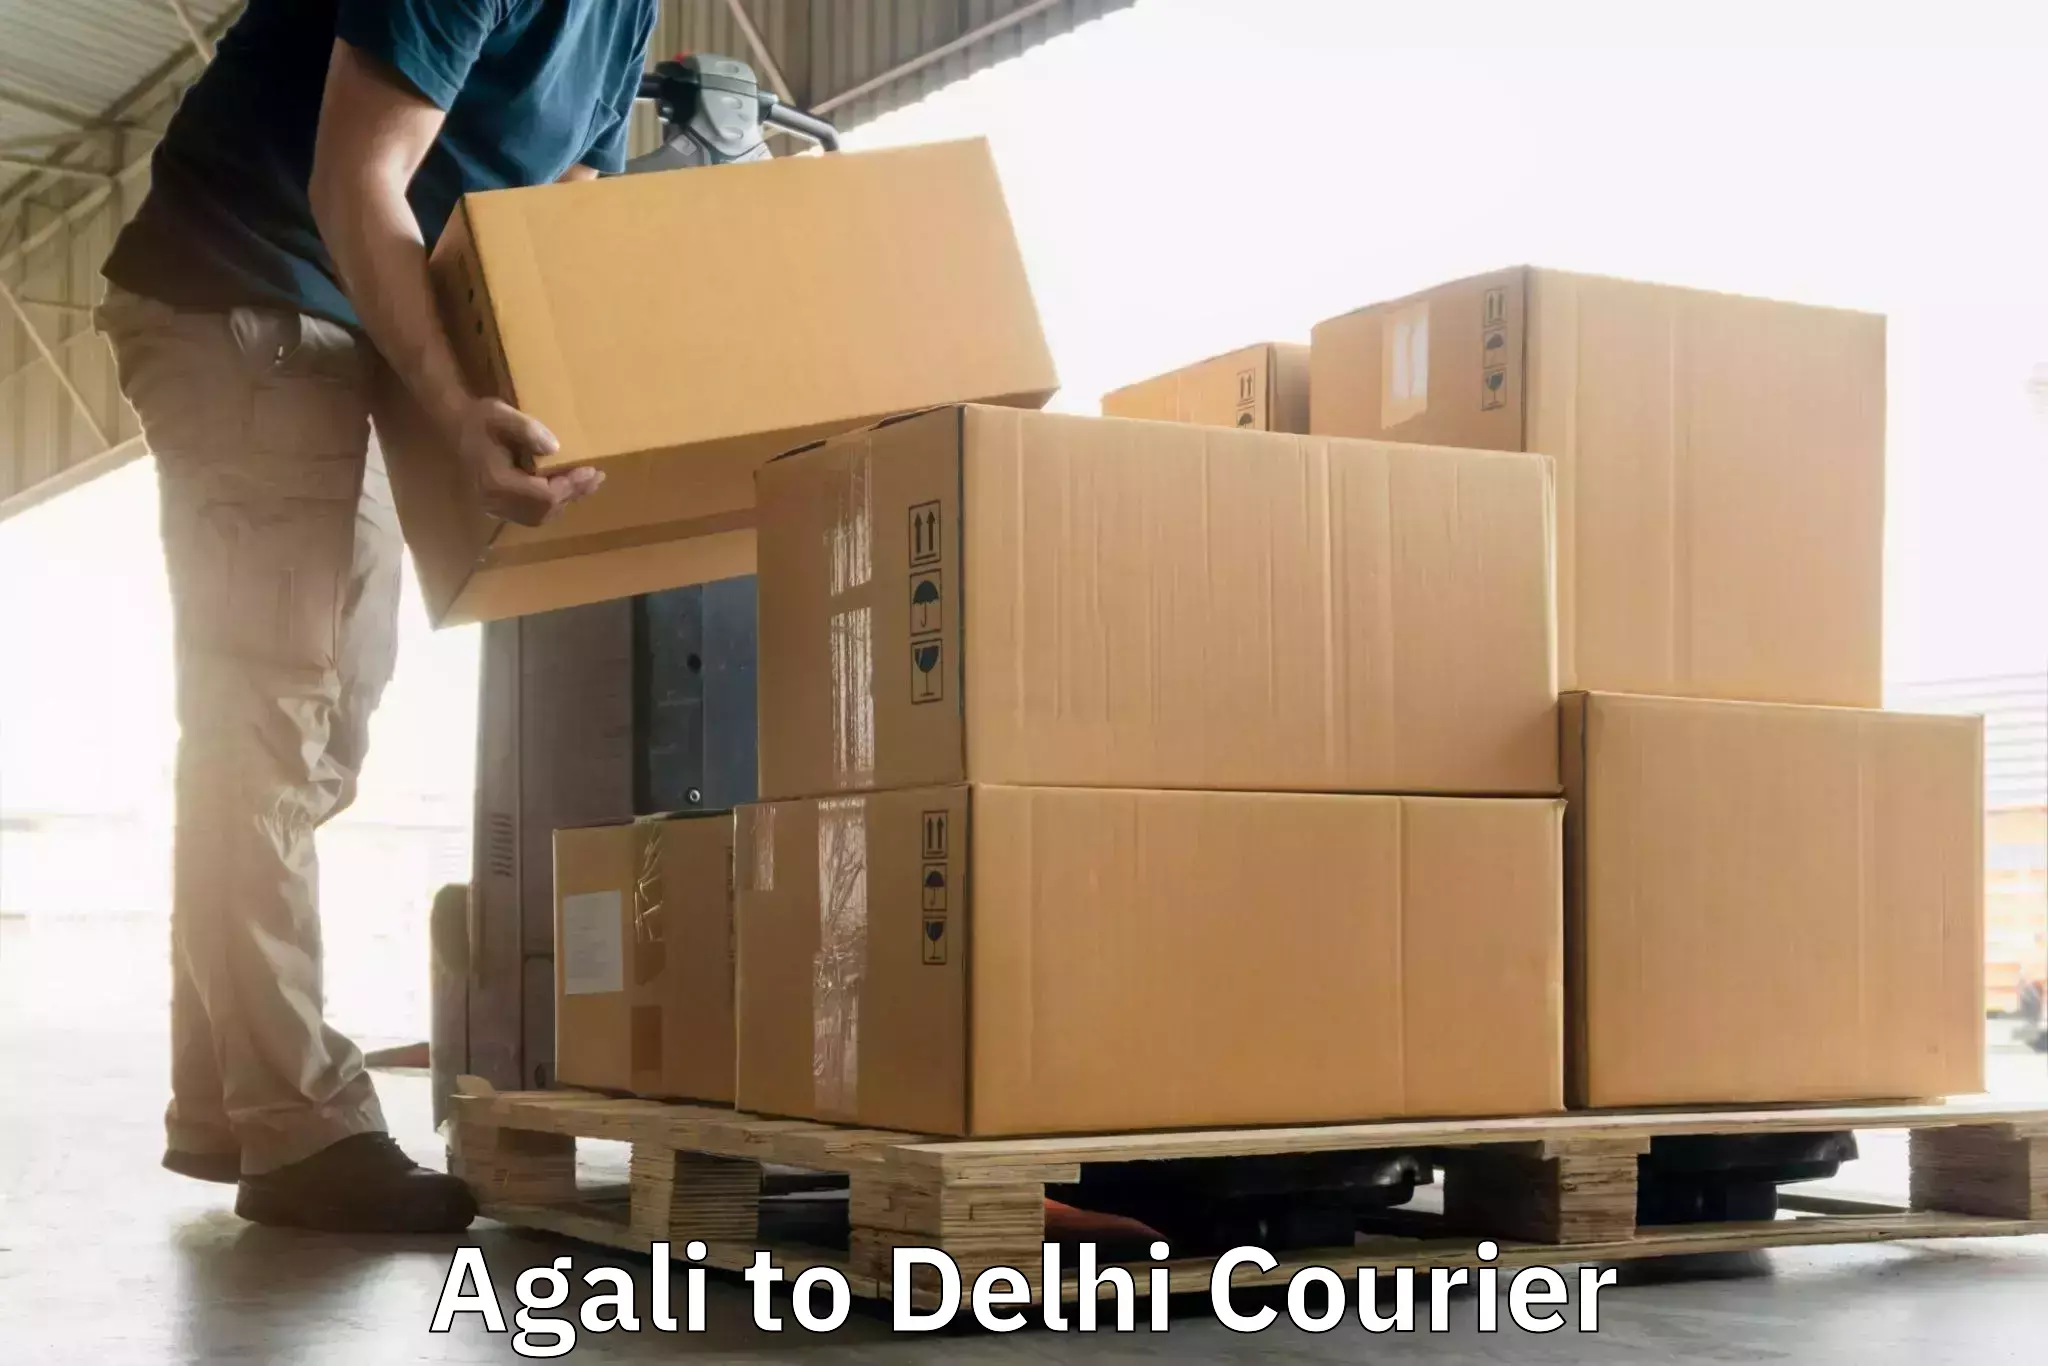 Flexible delivery scheduling Agali to Kalkaji